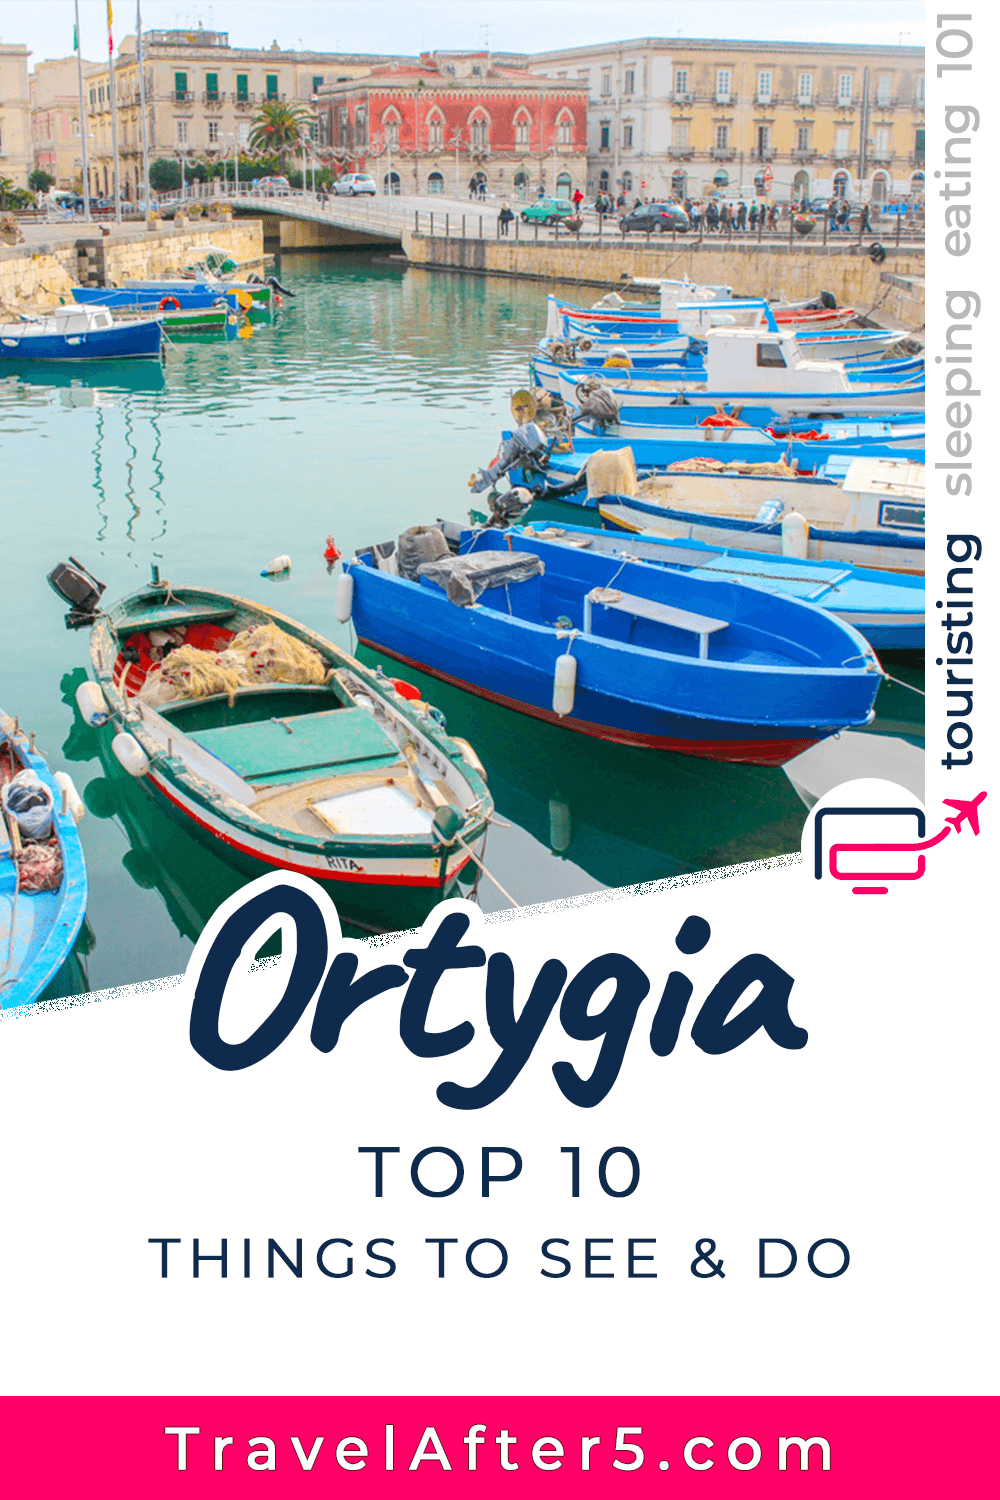 Pinterest Pin to Ortygia Top 10 Things to See & Do, by Travel After 5